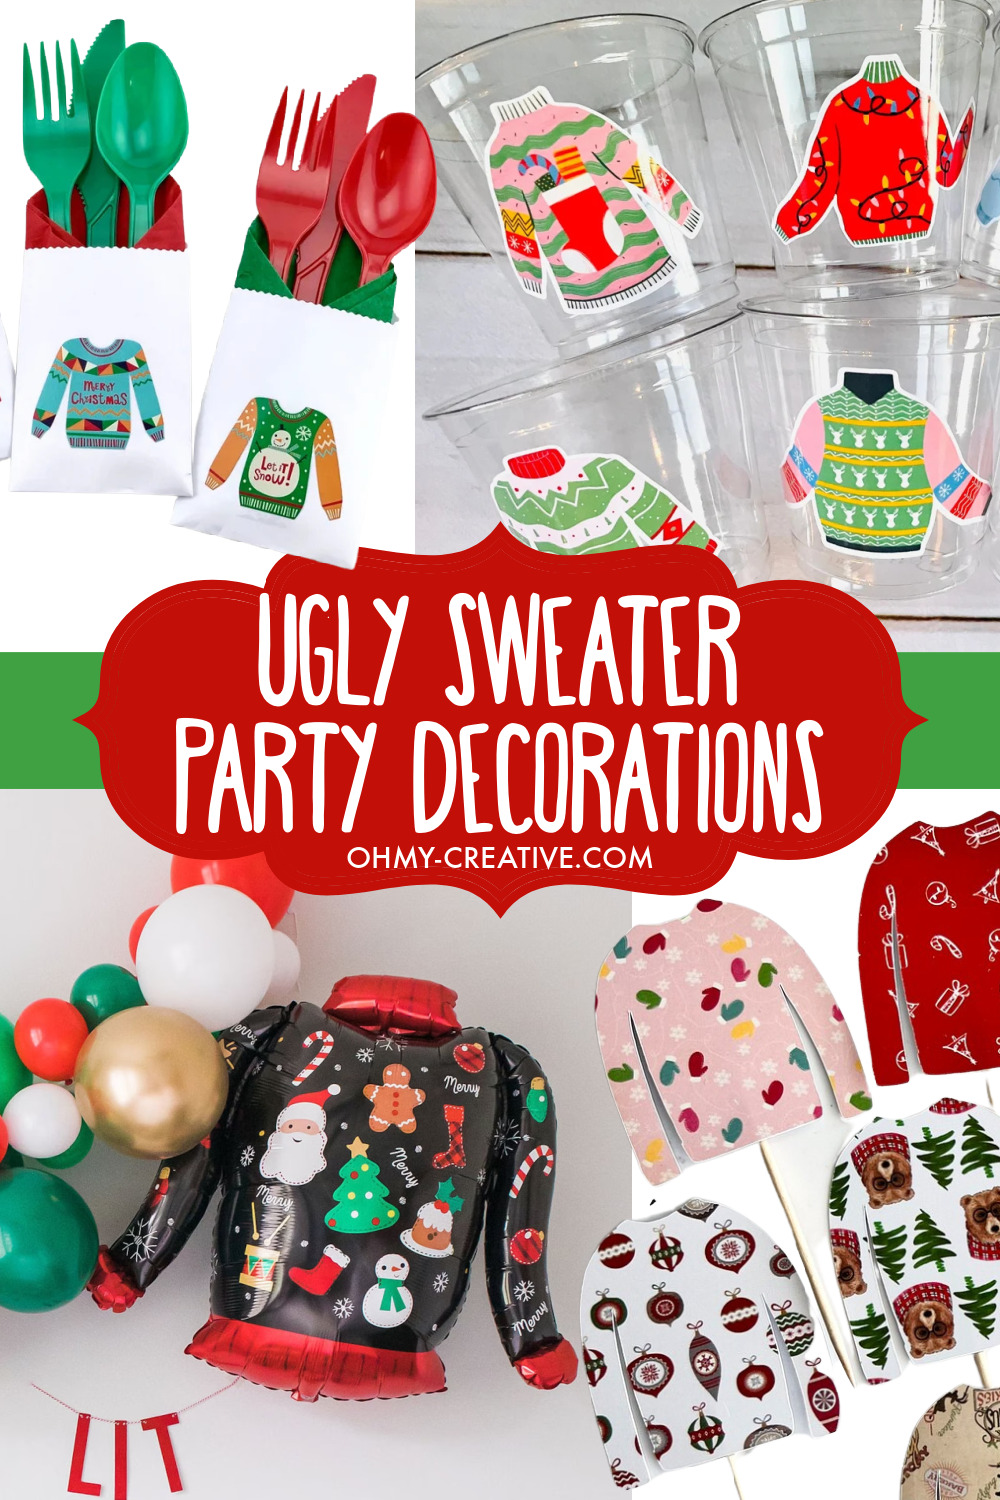 A collage of ugly sweater decorations including ugly sweater balloons, ugly sweater cups, ugly sweater party picks and utensil holders.